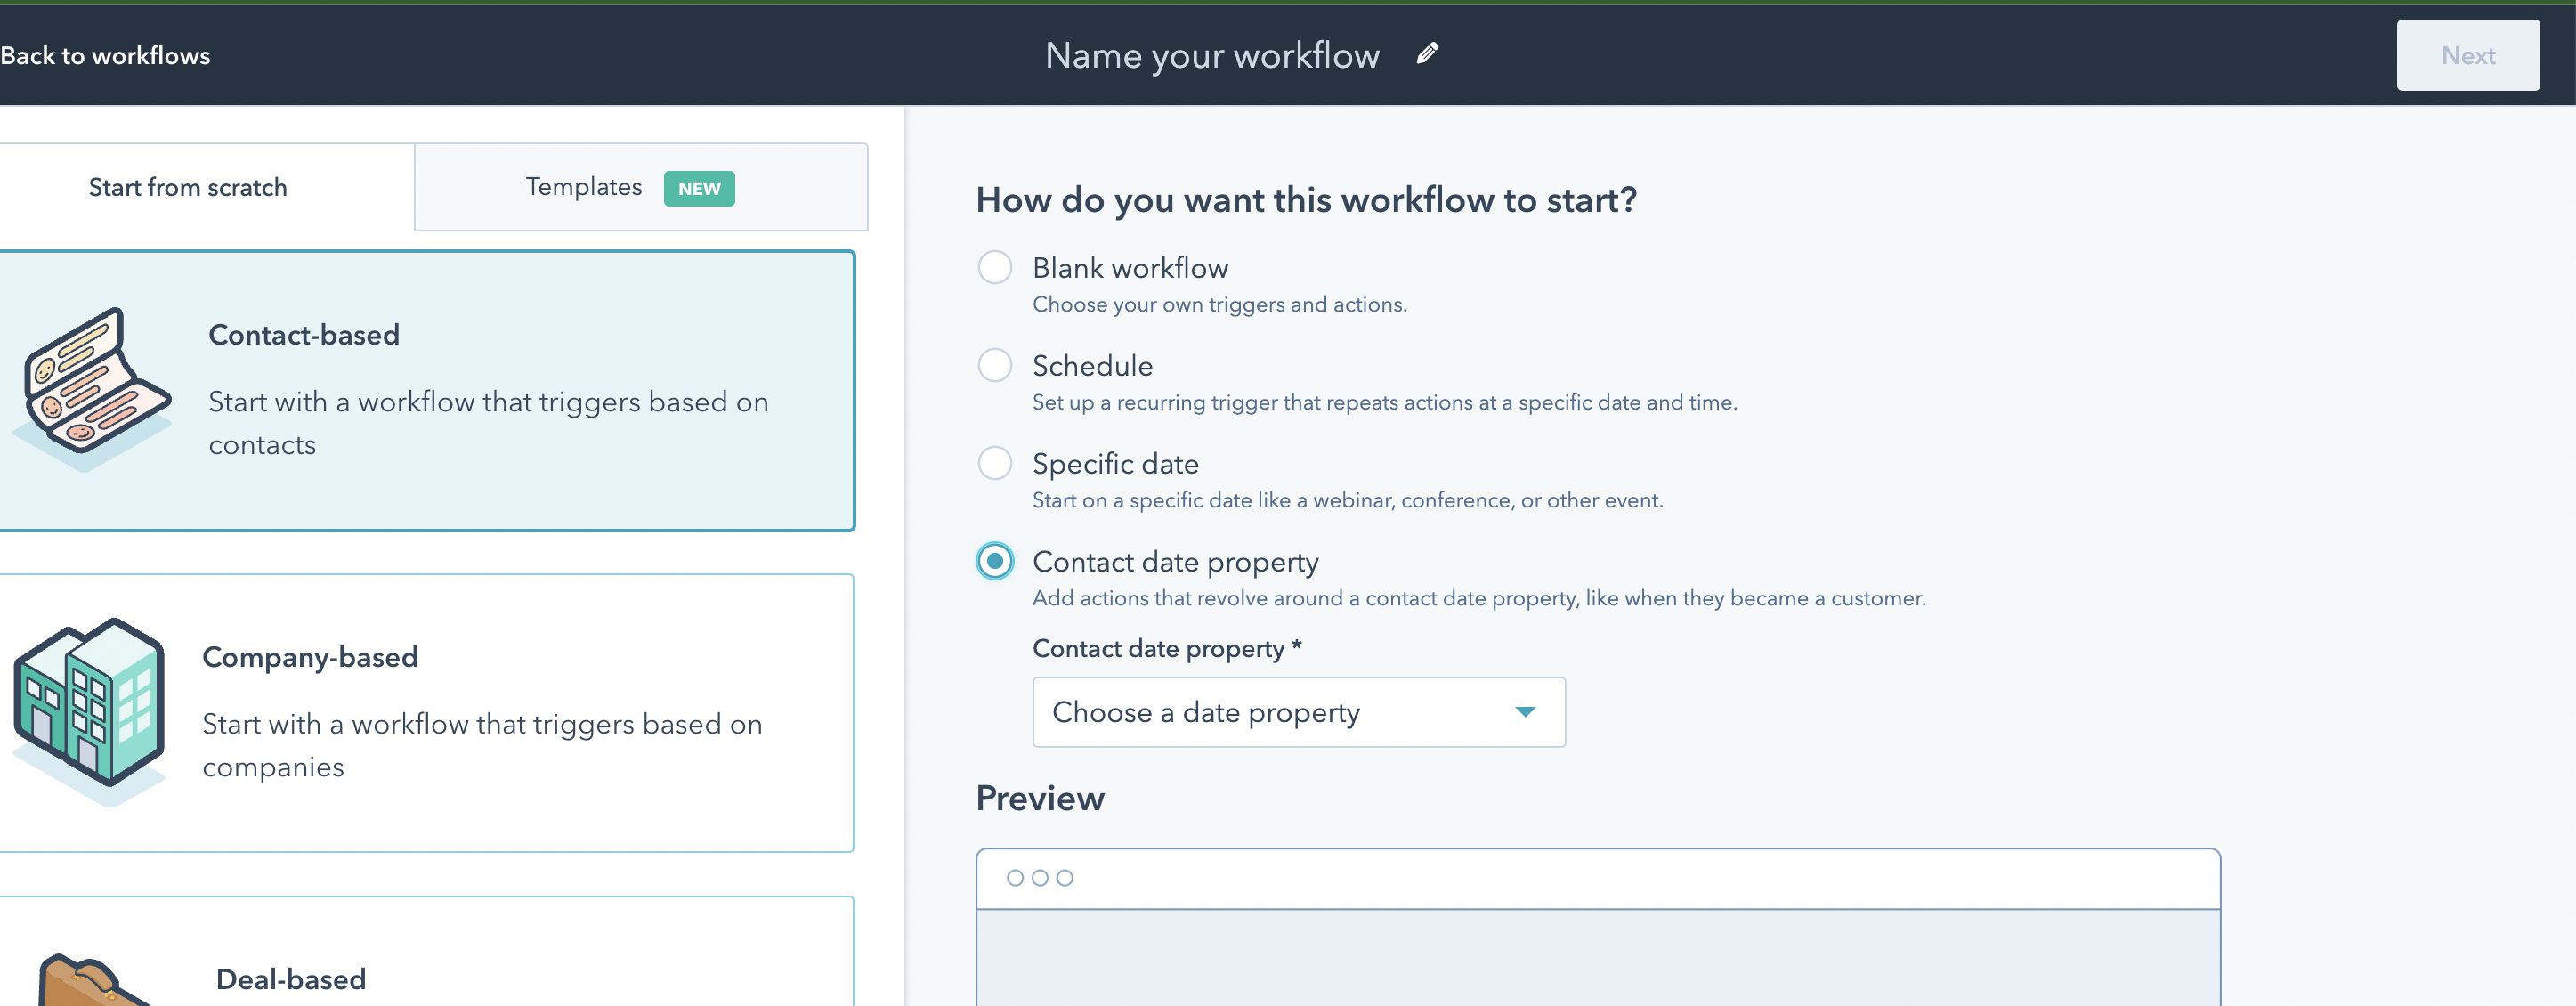 HubSpot's Contact Date Property Workflows